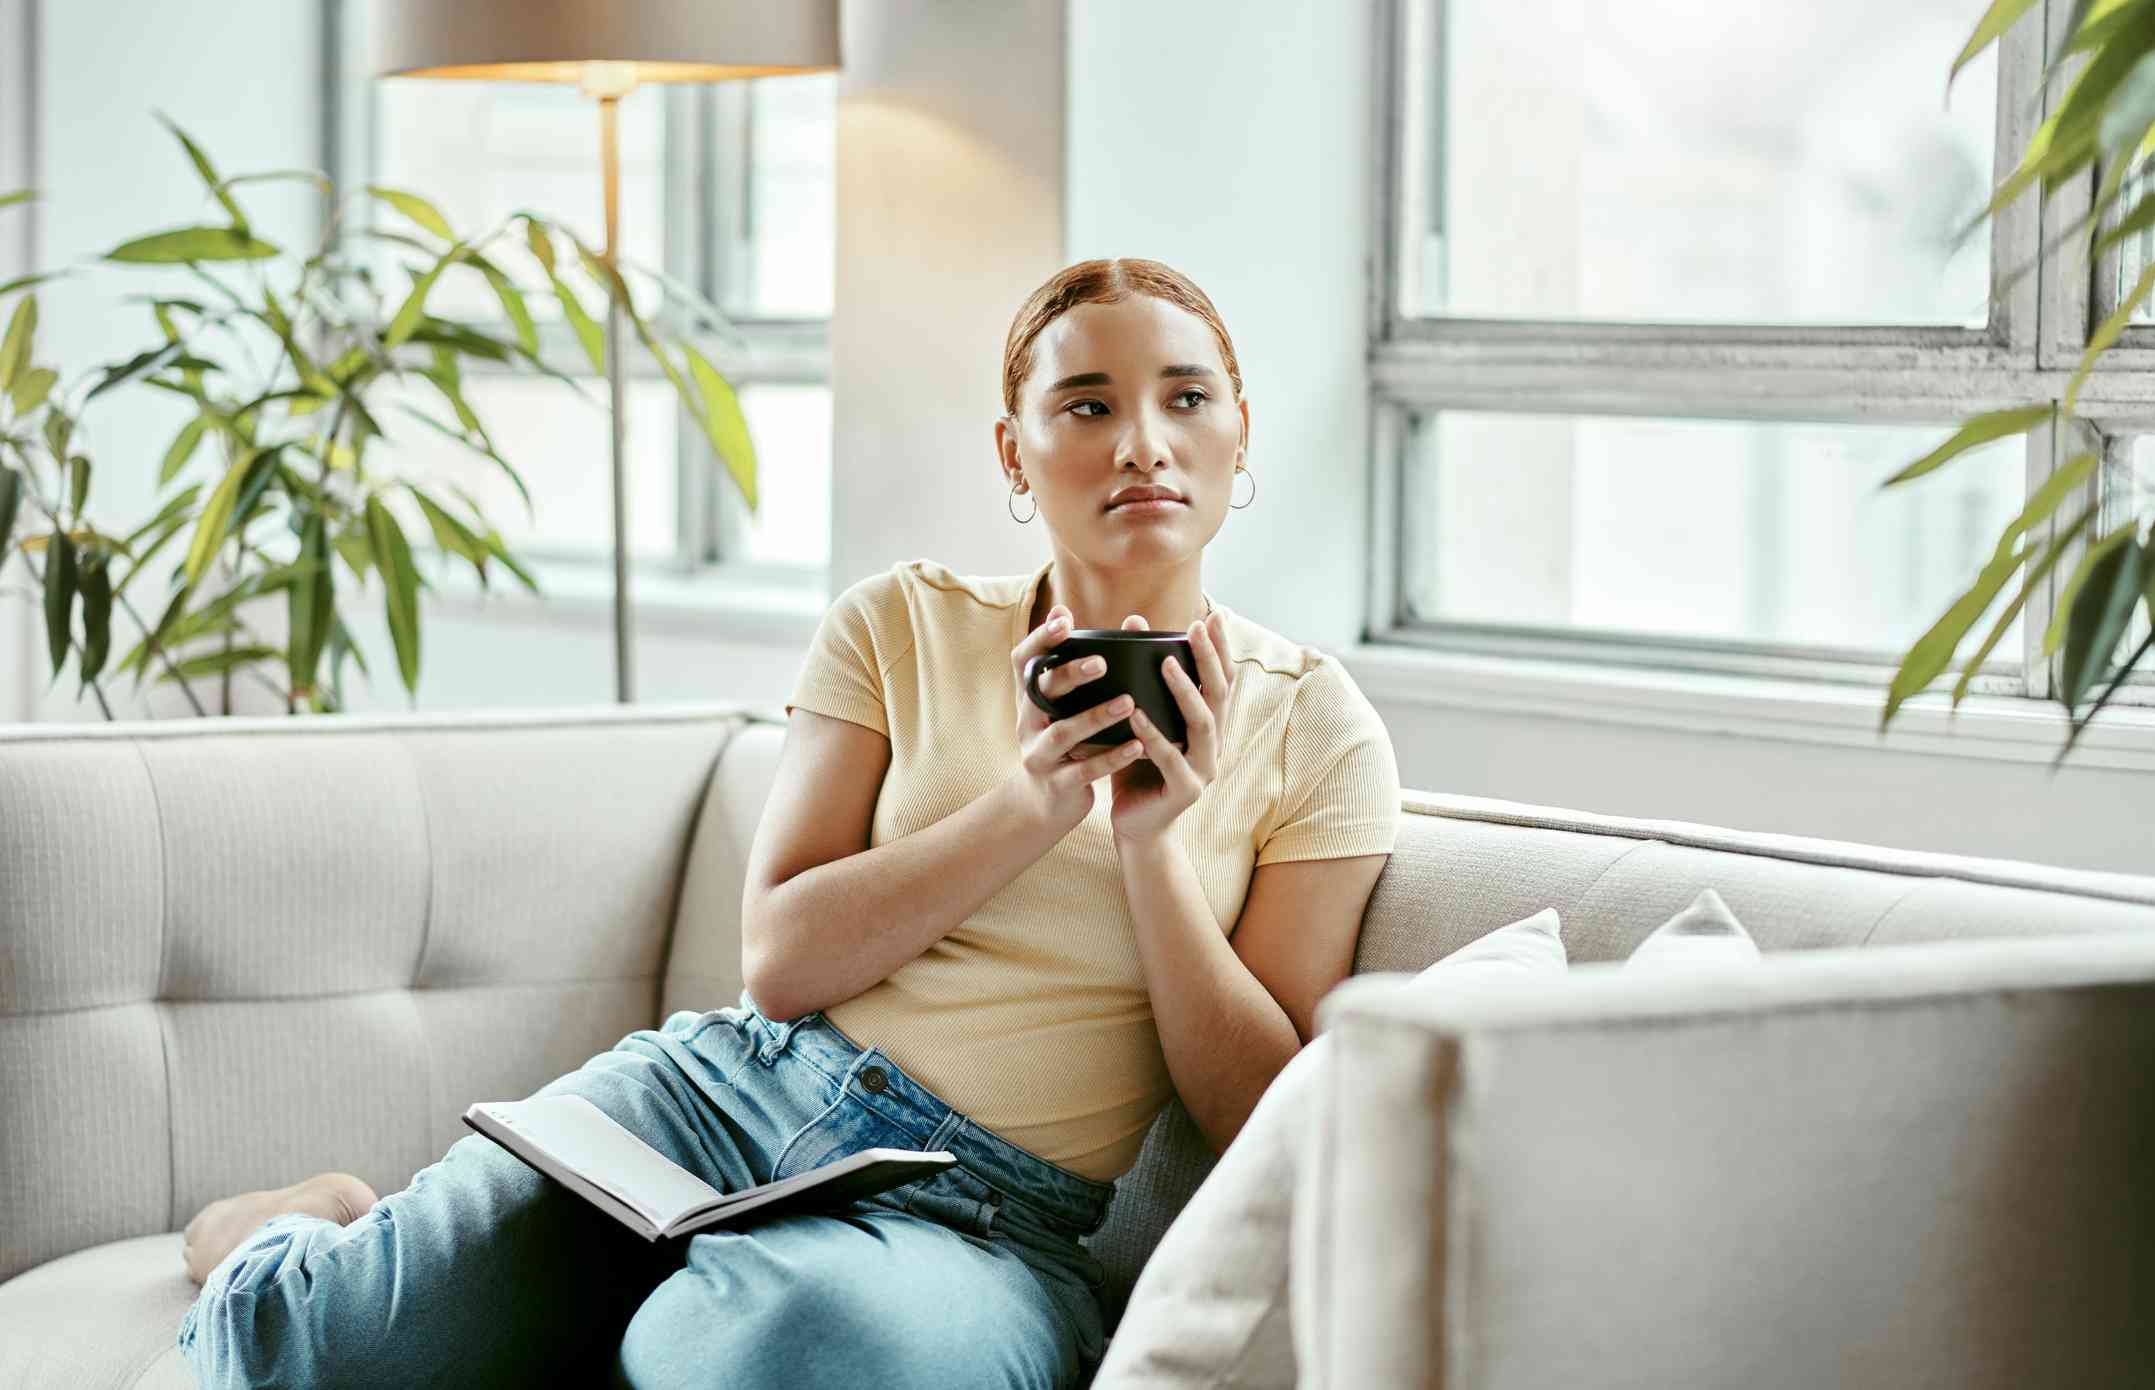 A woman in a yellow shirt sits curled up on the couch with a cup of coffee and gazes out of the window with a sad expression.